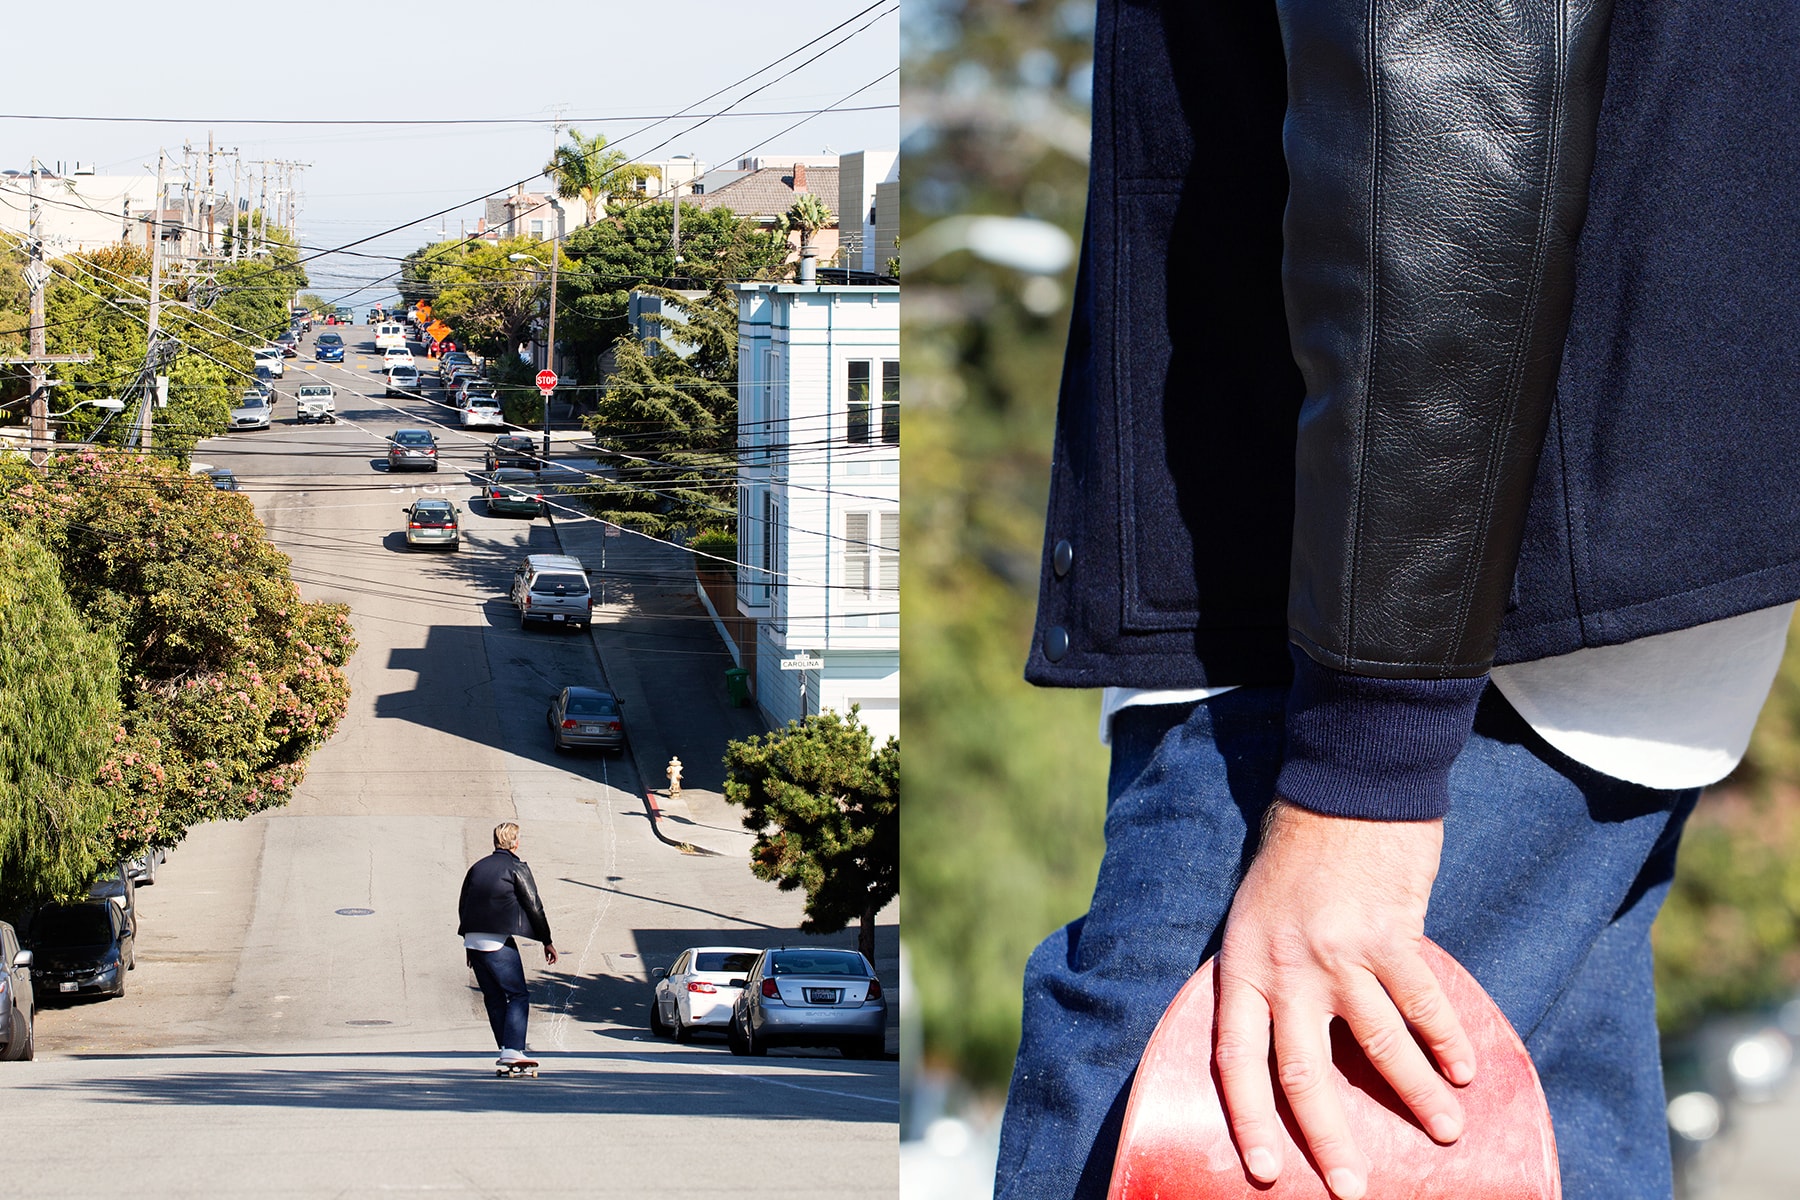 The Hill Side x Unionmade San Francisco Lookbook Skateboarding jackets plaid 2016 slopped pavement